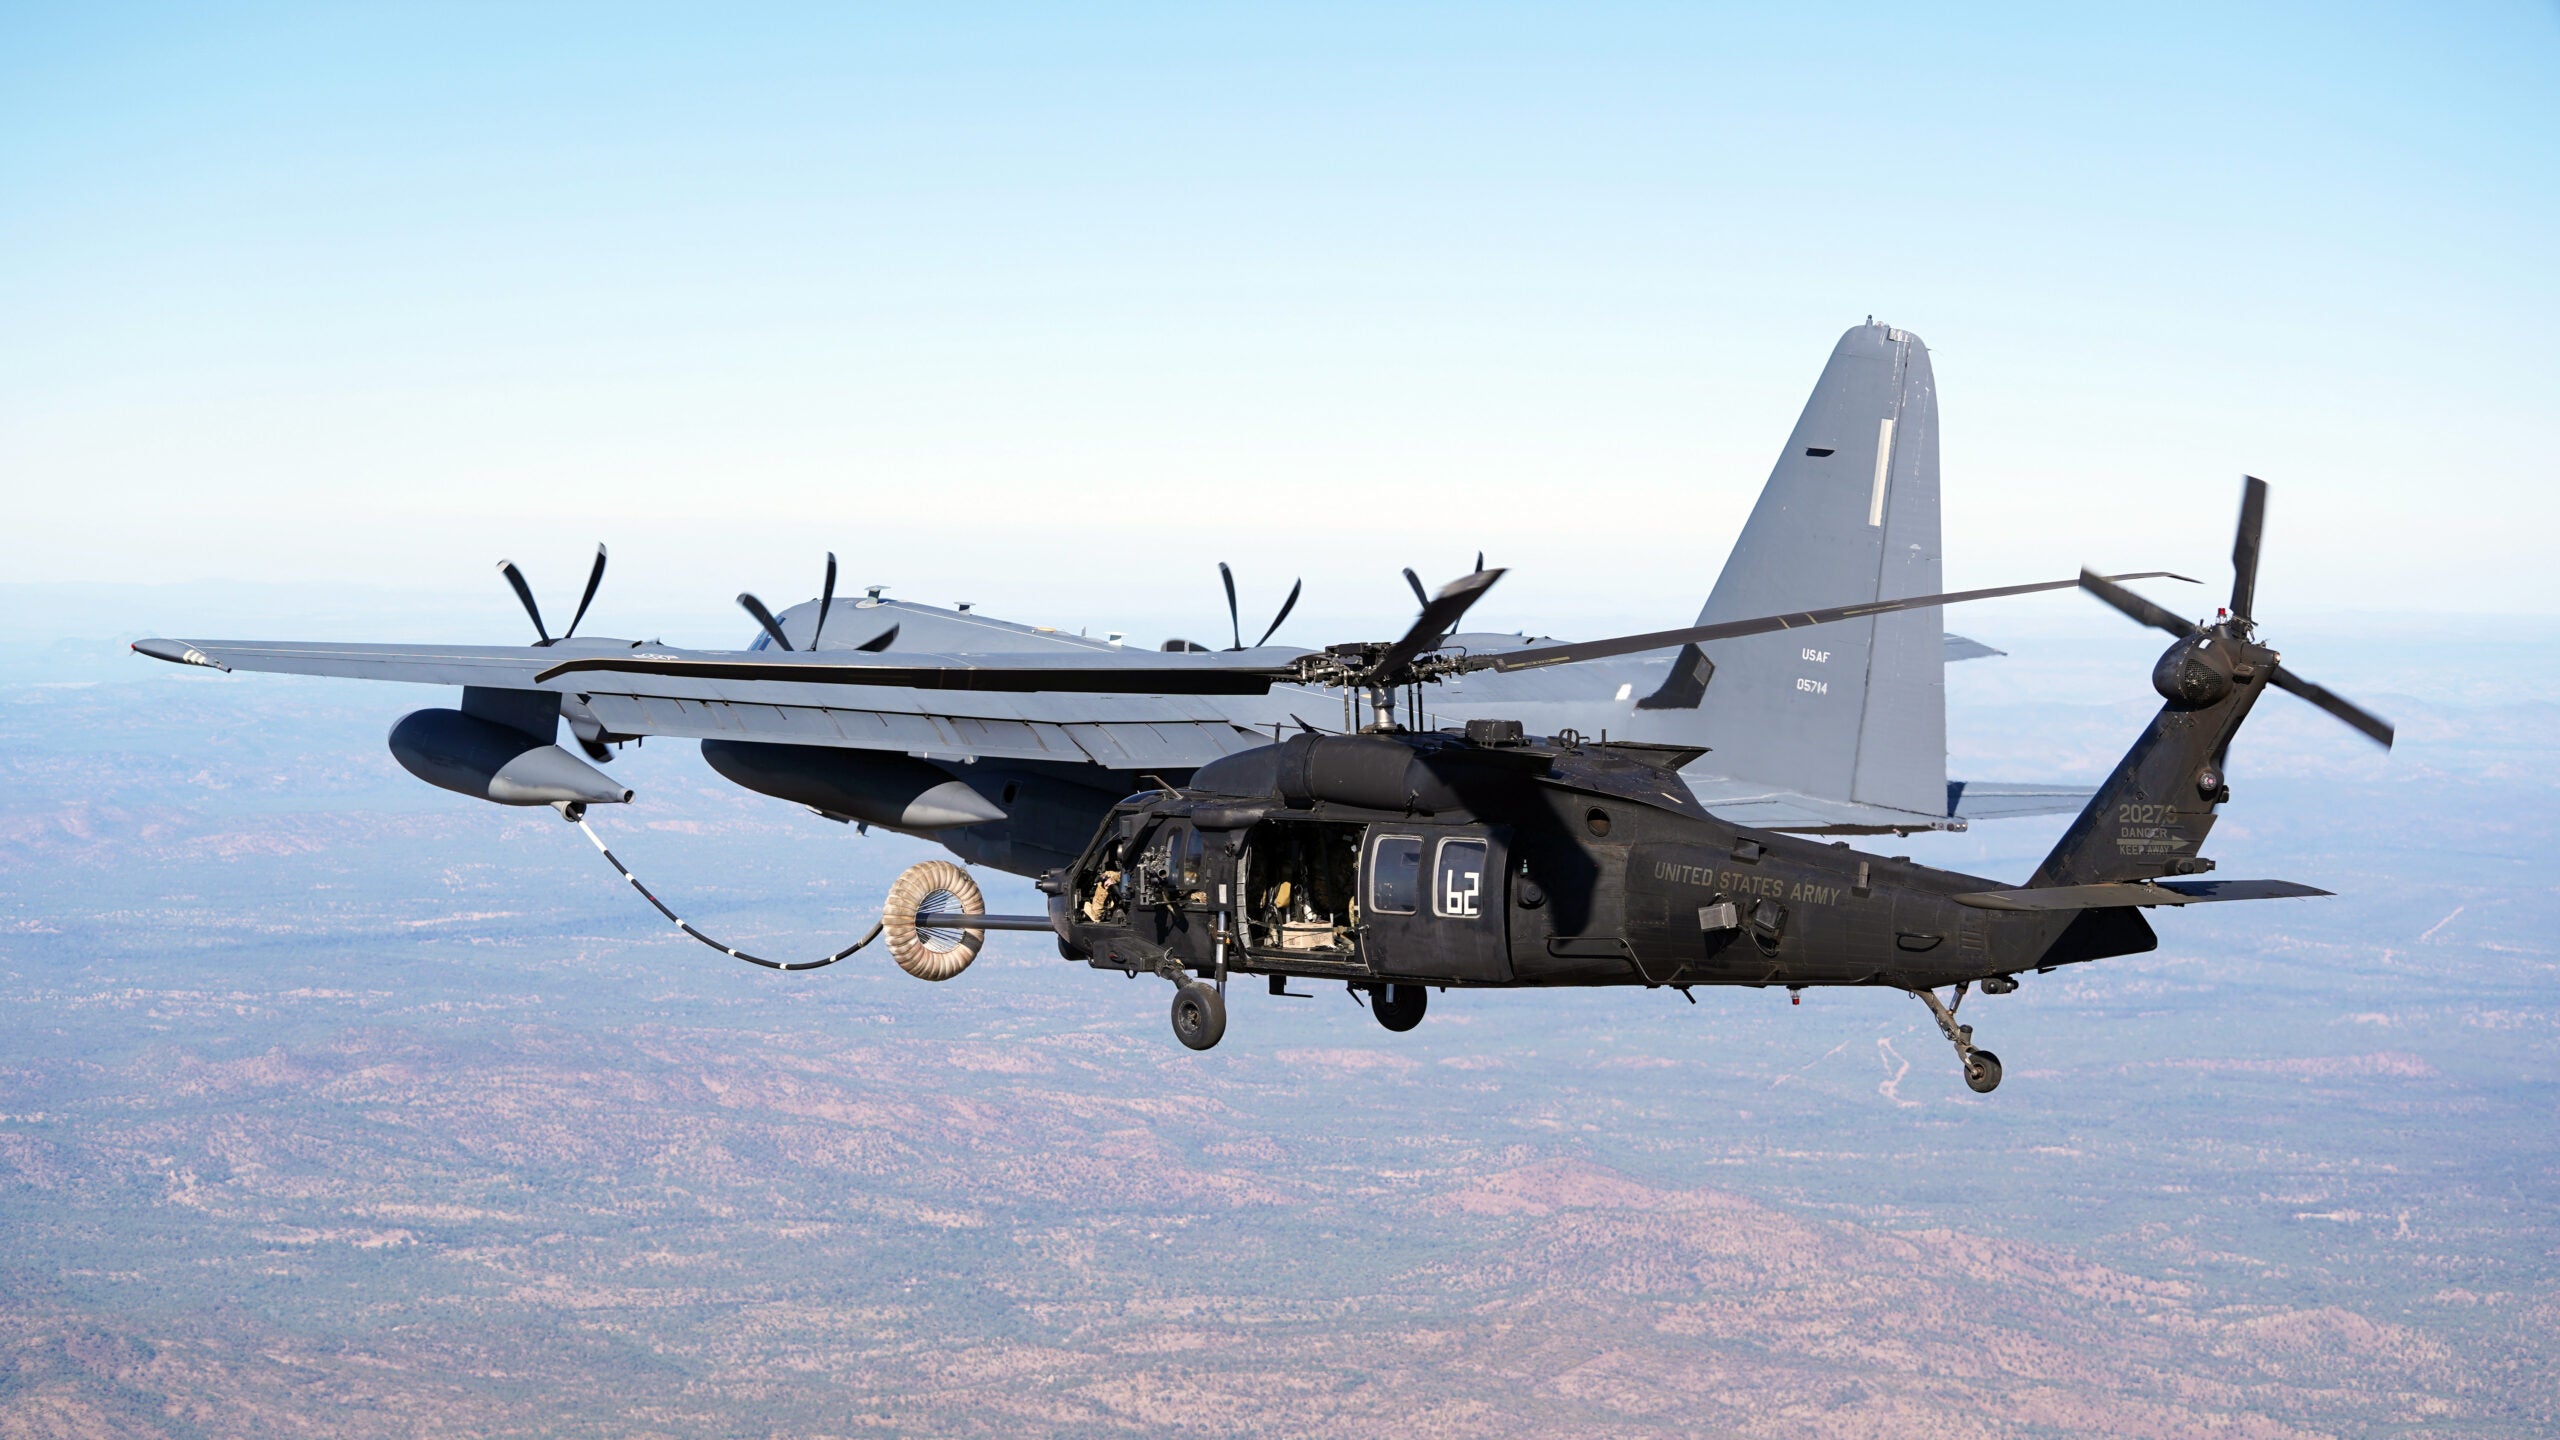 An MC-130J Air Commando II conducts helicopter air-to-air refueling with an MH-60 Black Hawk, both supporting Special Operations Command Pacific, during Talisman Sabre 21 above Queensland, Australia, July 26, 2021. TS21 is Australia’s largest military exercise with the U.S. and is a demonstration of the strong alliance underpinned by deep levels of cooperation and trust built over decades of operating and training together. (U.S. Air Force photo by 1st Lt. Joshua Thompson)